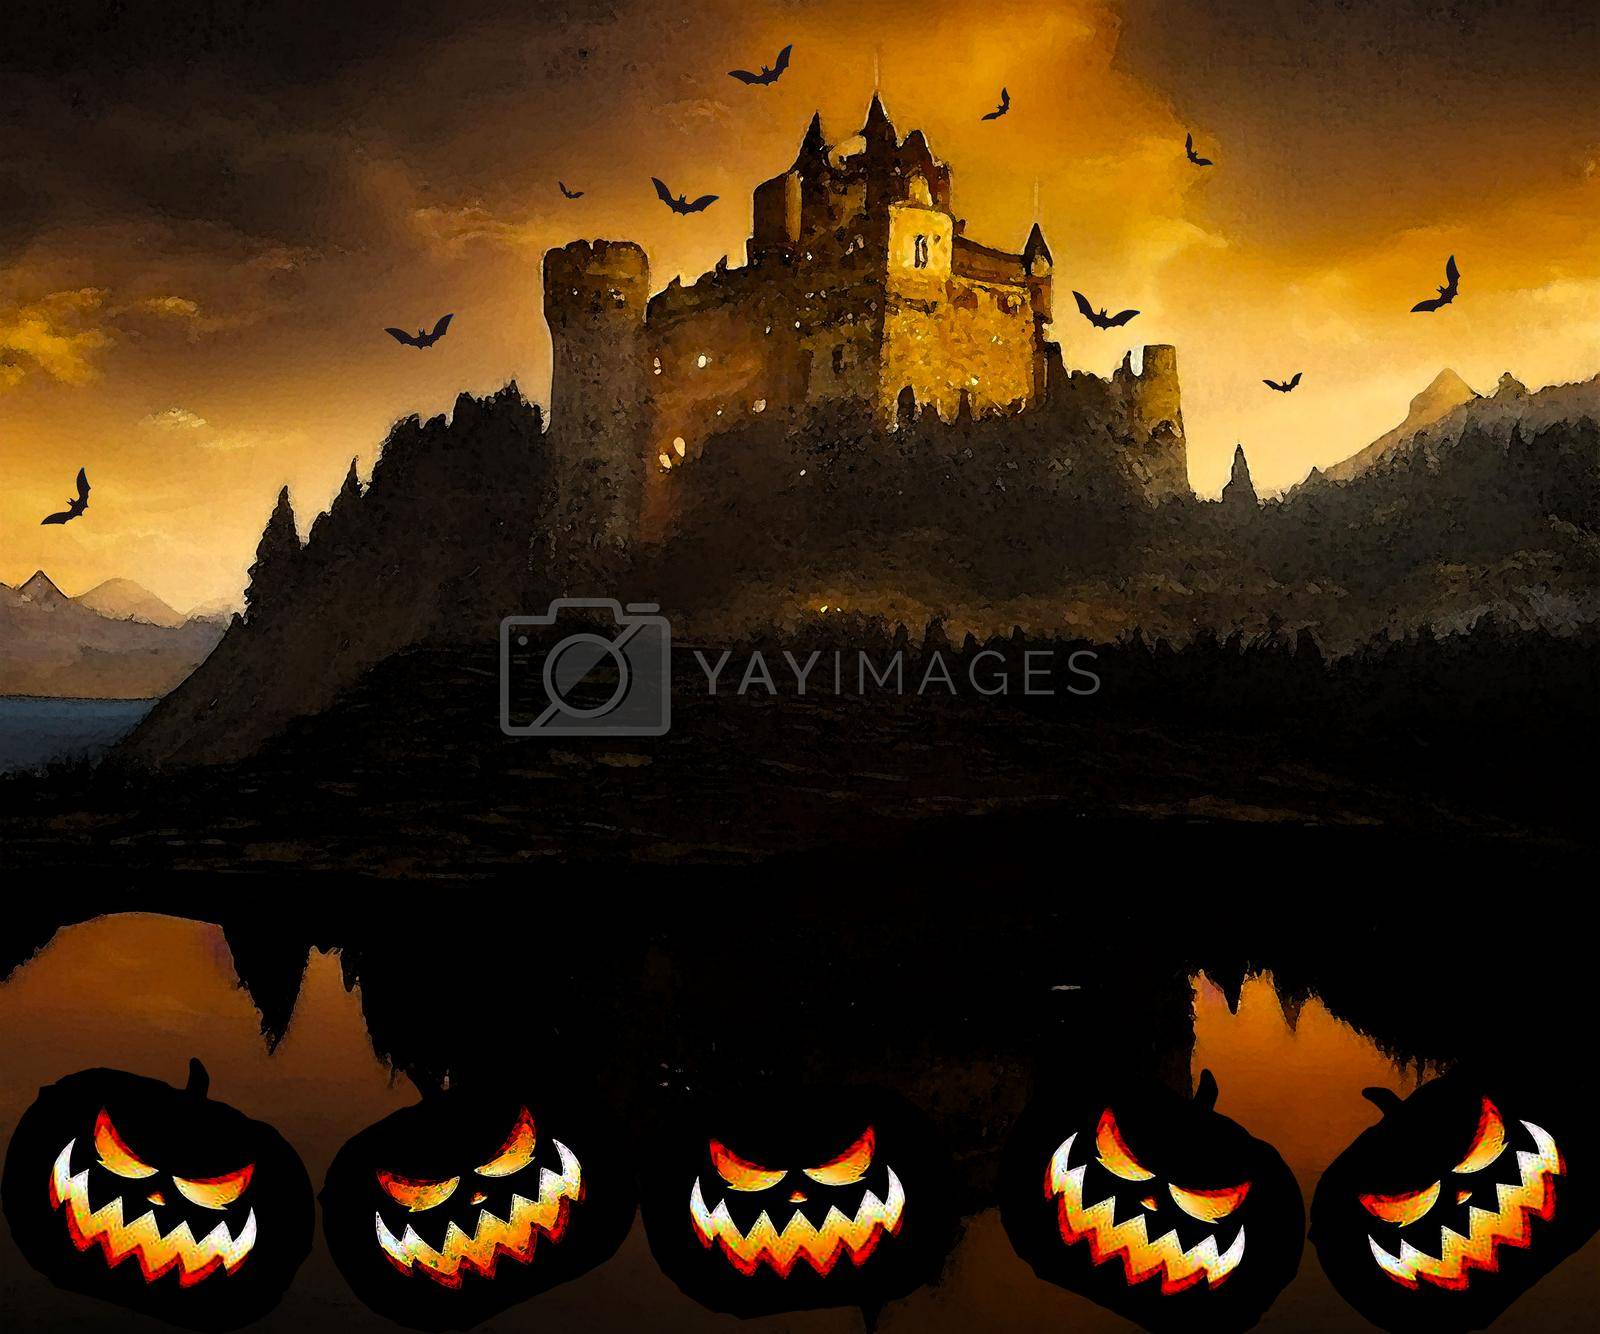 Royalty free image of Spooky scary Halloween images and vector pumpkins background, illustration for multimedia content or halloween card. by antoksena